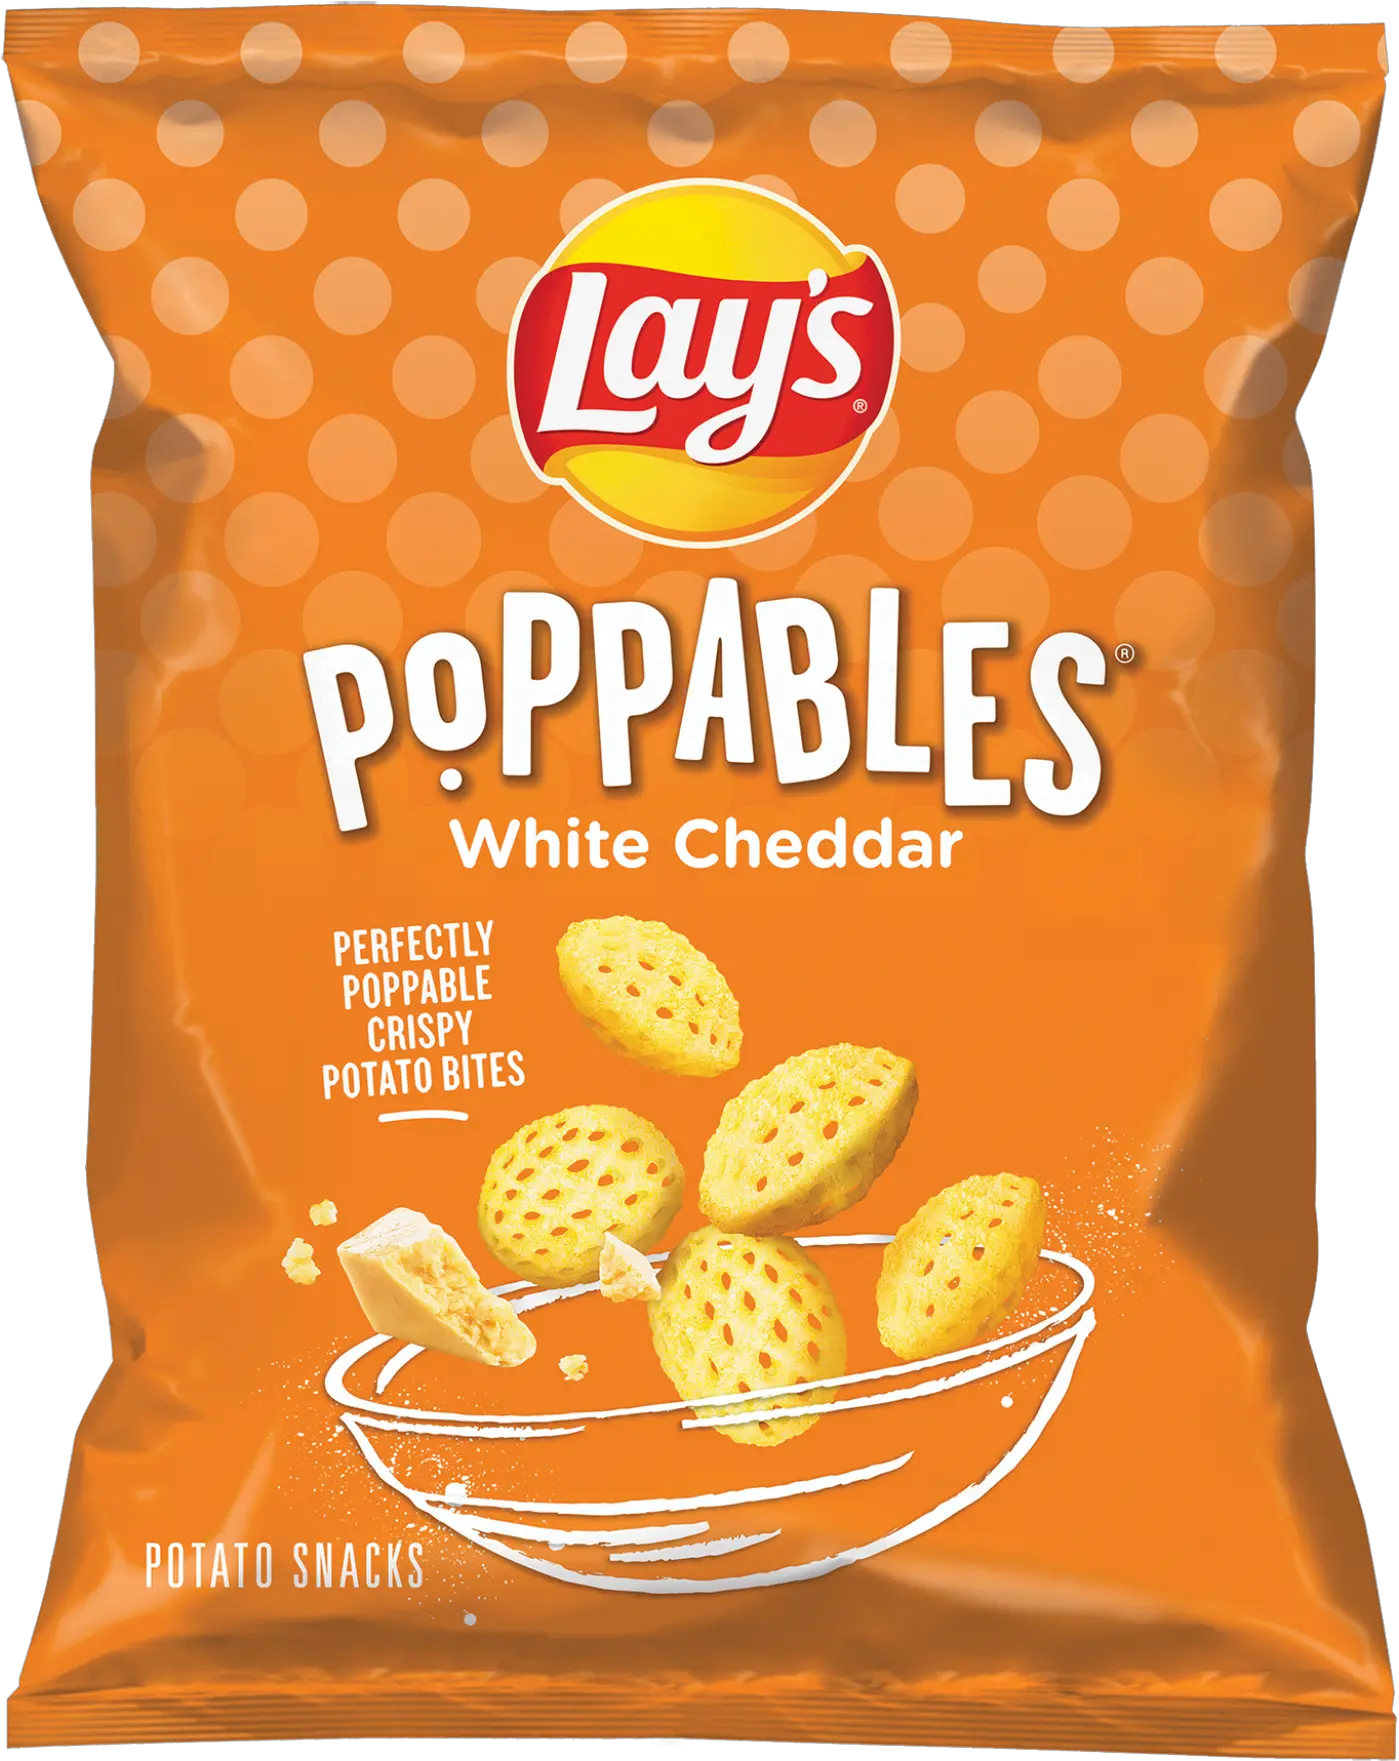 Lays Poppables White Cheddar From Lays Poppables White Cheddar Png Lays Png